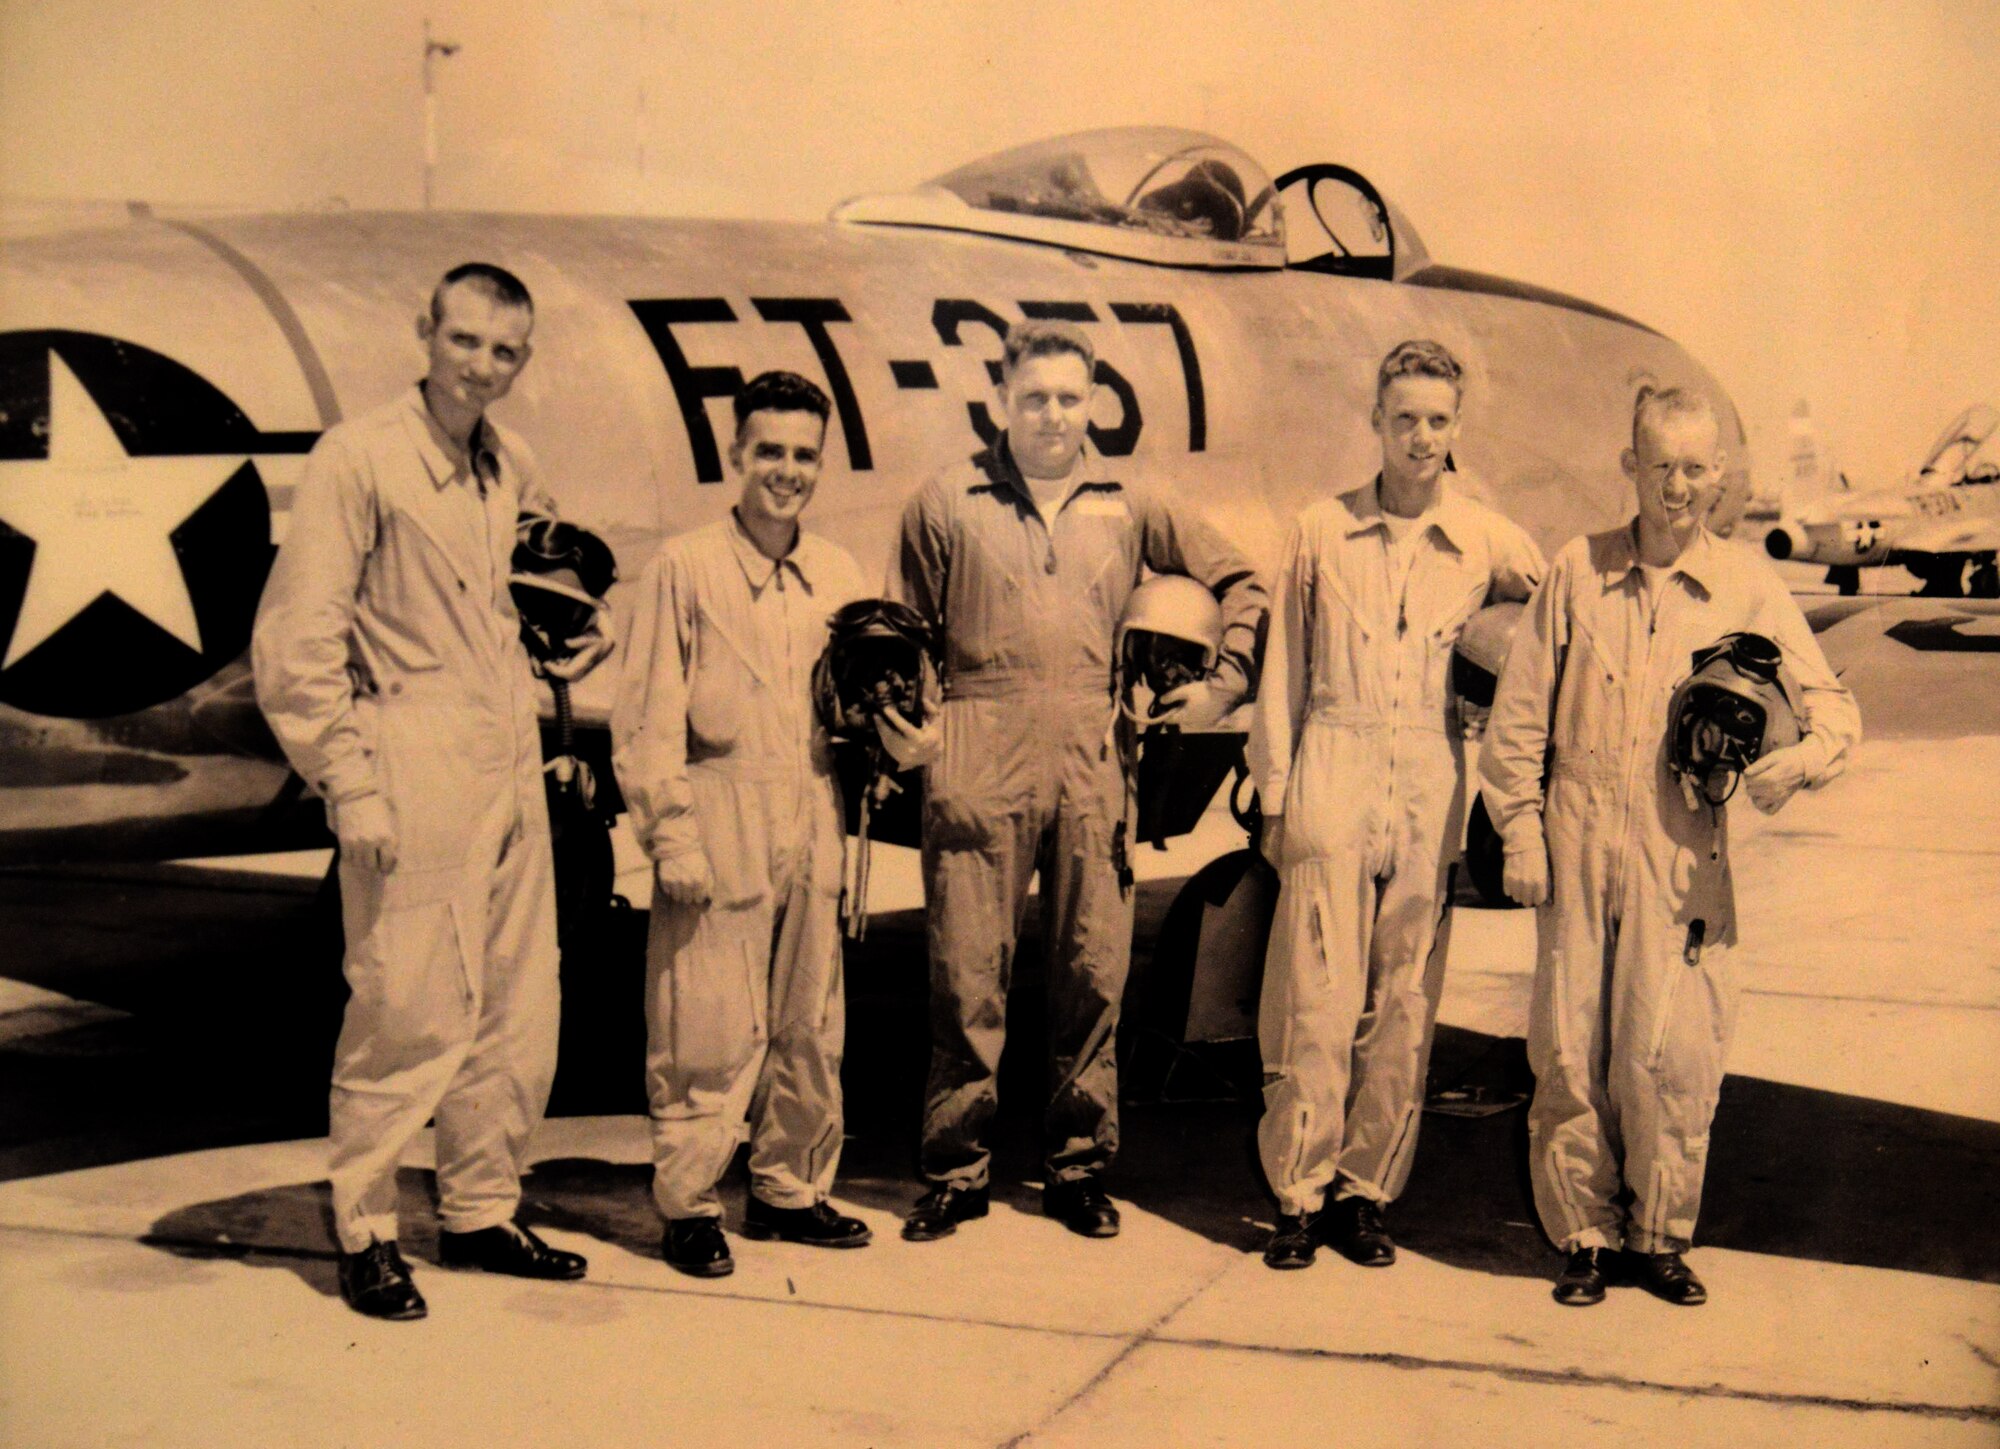 Second Lt. Alma Skousen, far right, poses in front of an aircraft in 1951 after finishing flight school at Williams Air Force Base in Chandler, Ariz.  (Courtesy photo)